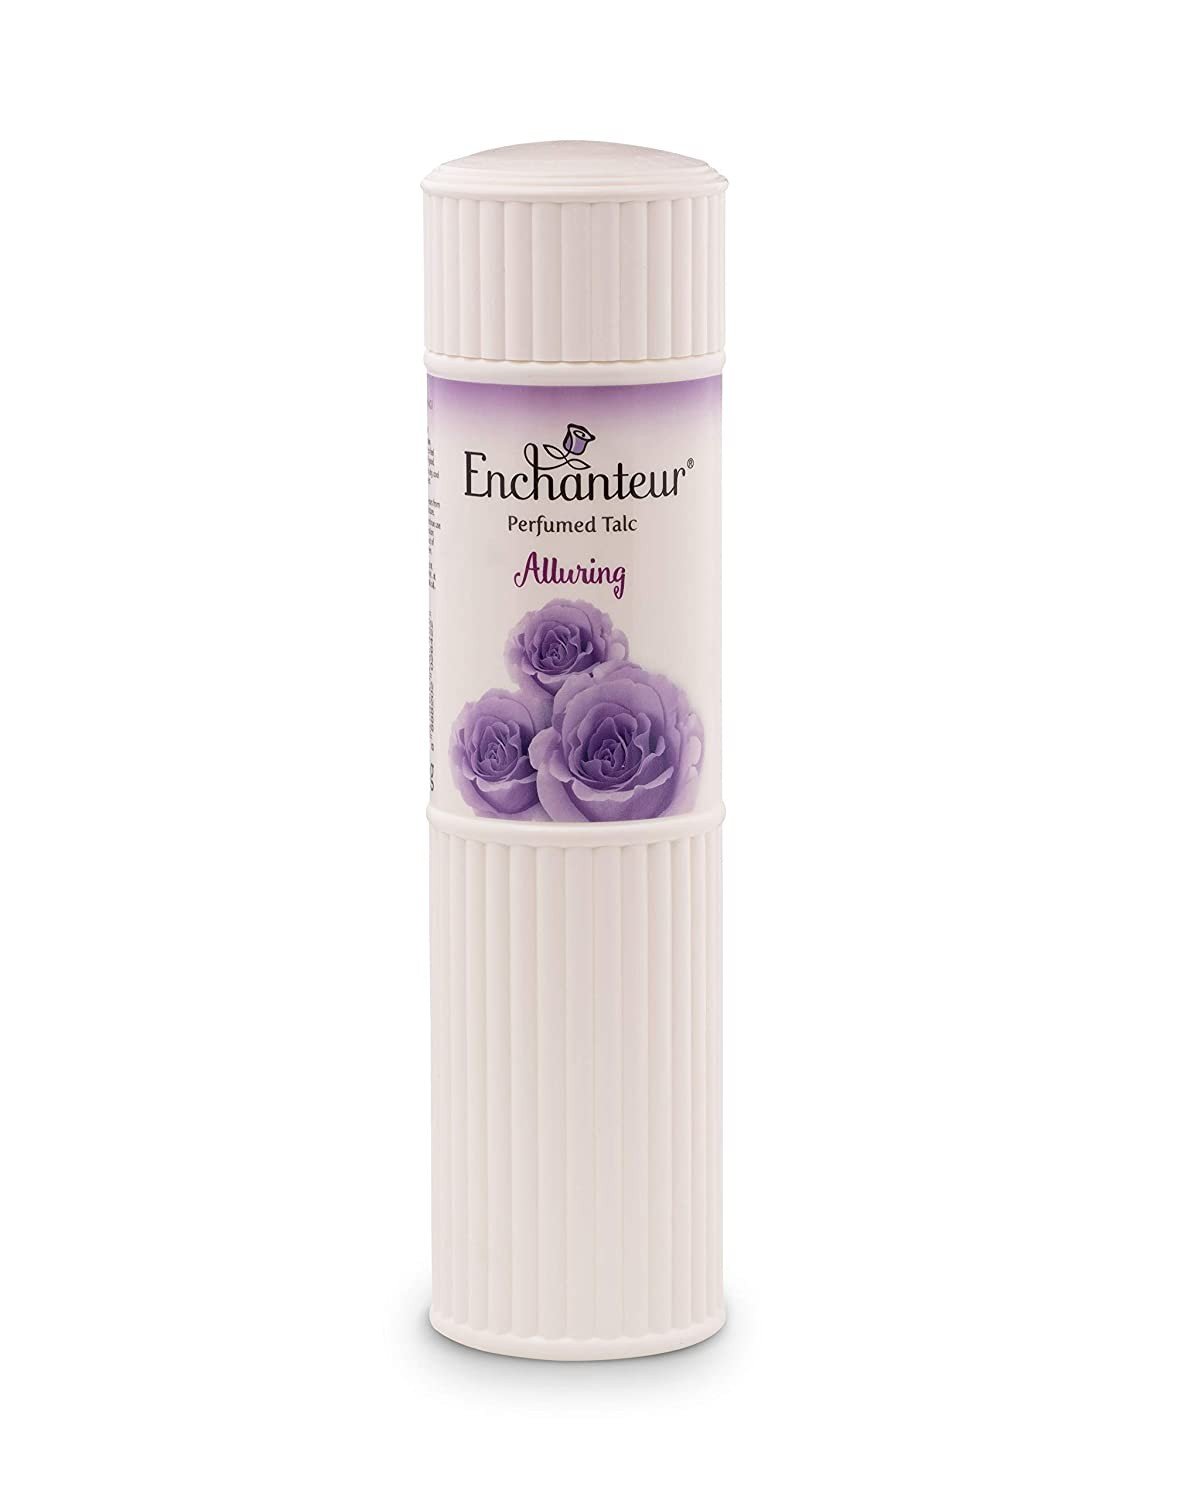 Enchanteur Alluring Perfumed Talc with Classic Notes of Roses and Exotic Irises, 250 g